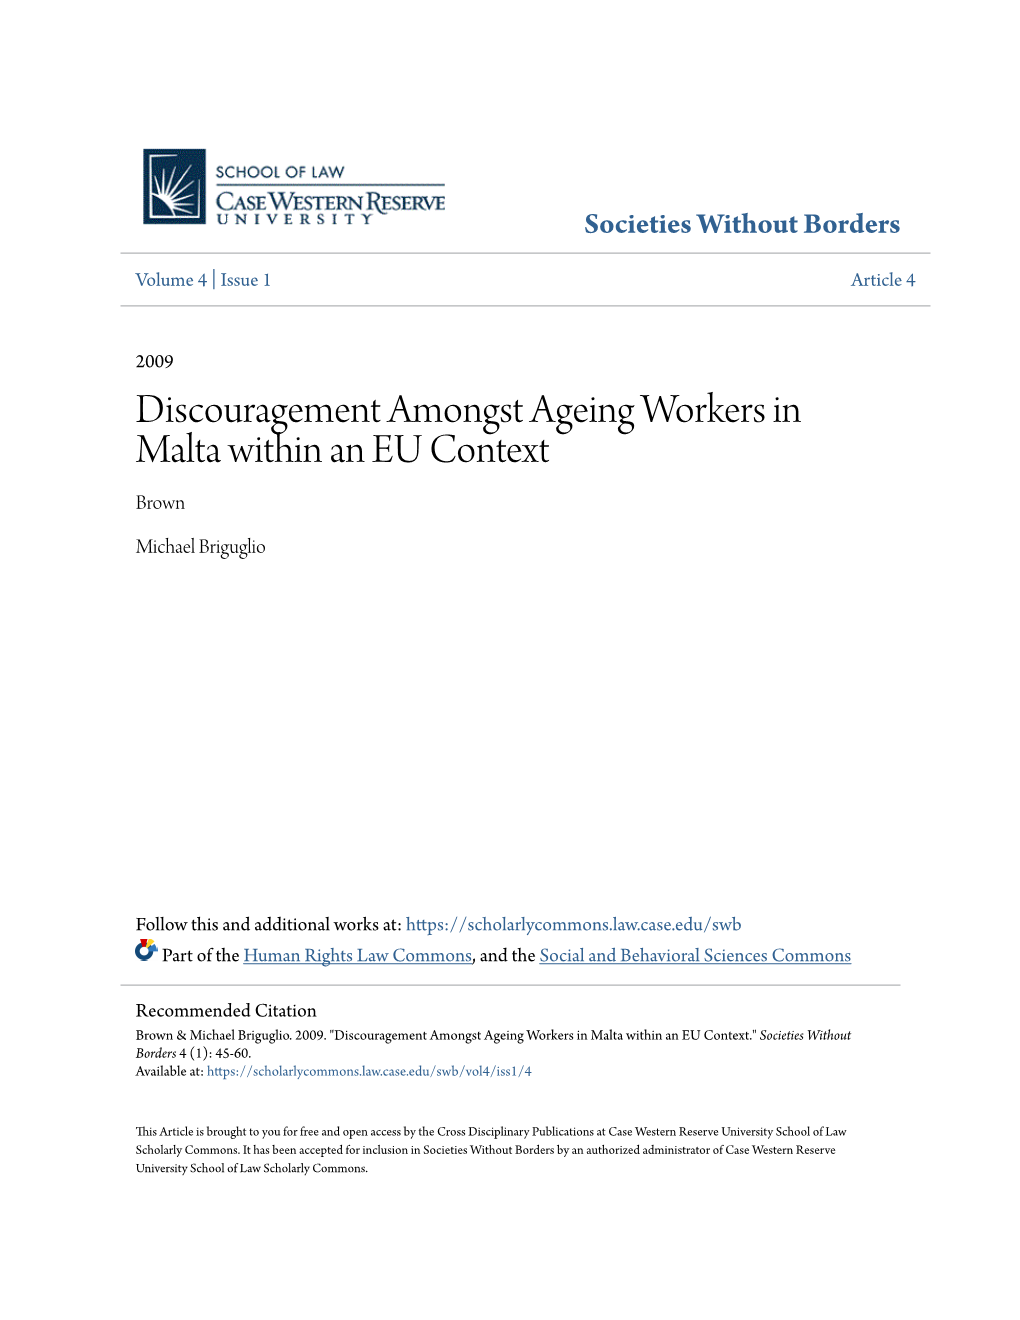 Discouragement Amongst Ageing Workers in Malta Within an EU Context Brown